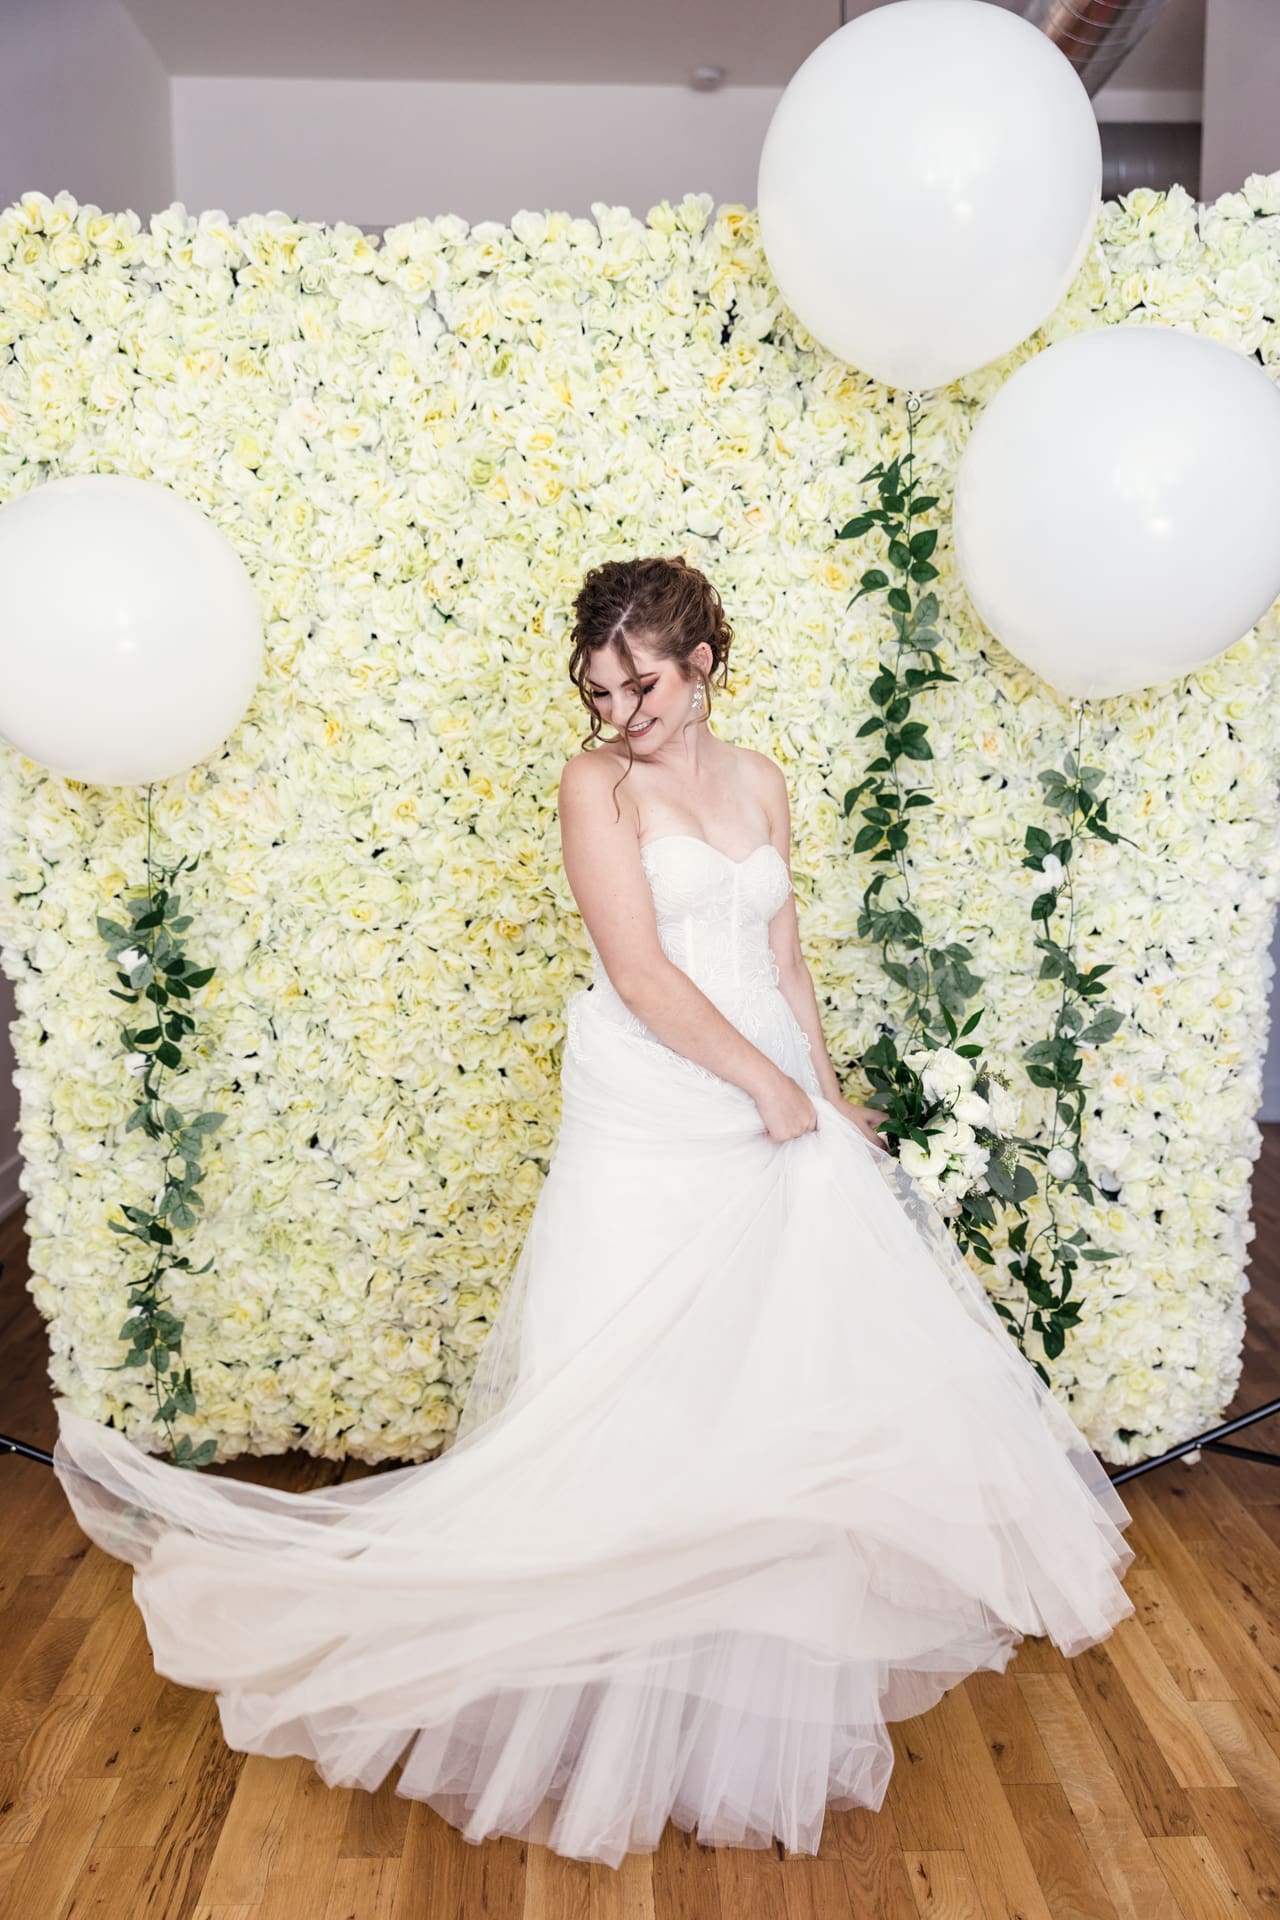 Fun portrait of bride twirling her dress with white floral backdrop and white balloons at Chicago photography studio P&M Studio